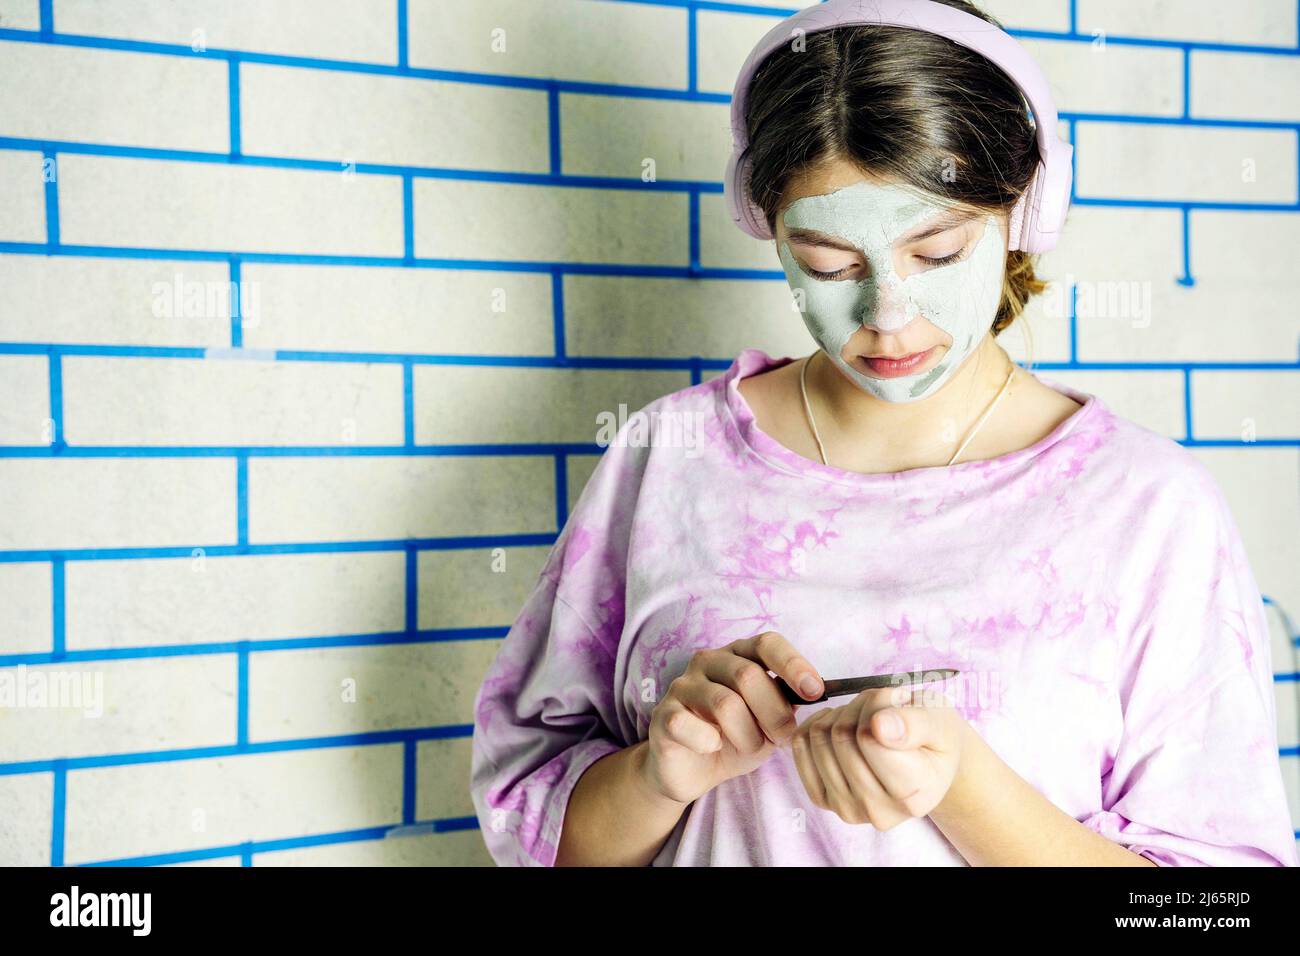 teenage girl takes care of her face by applying a cosmetic mask Stock Photo